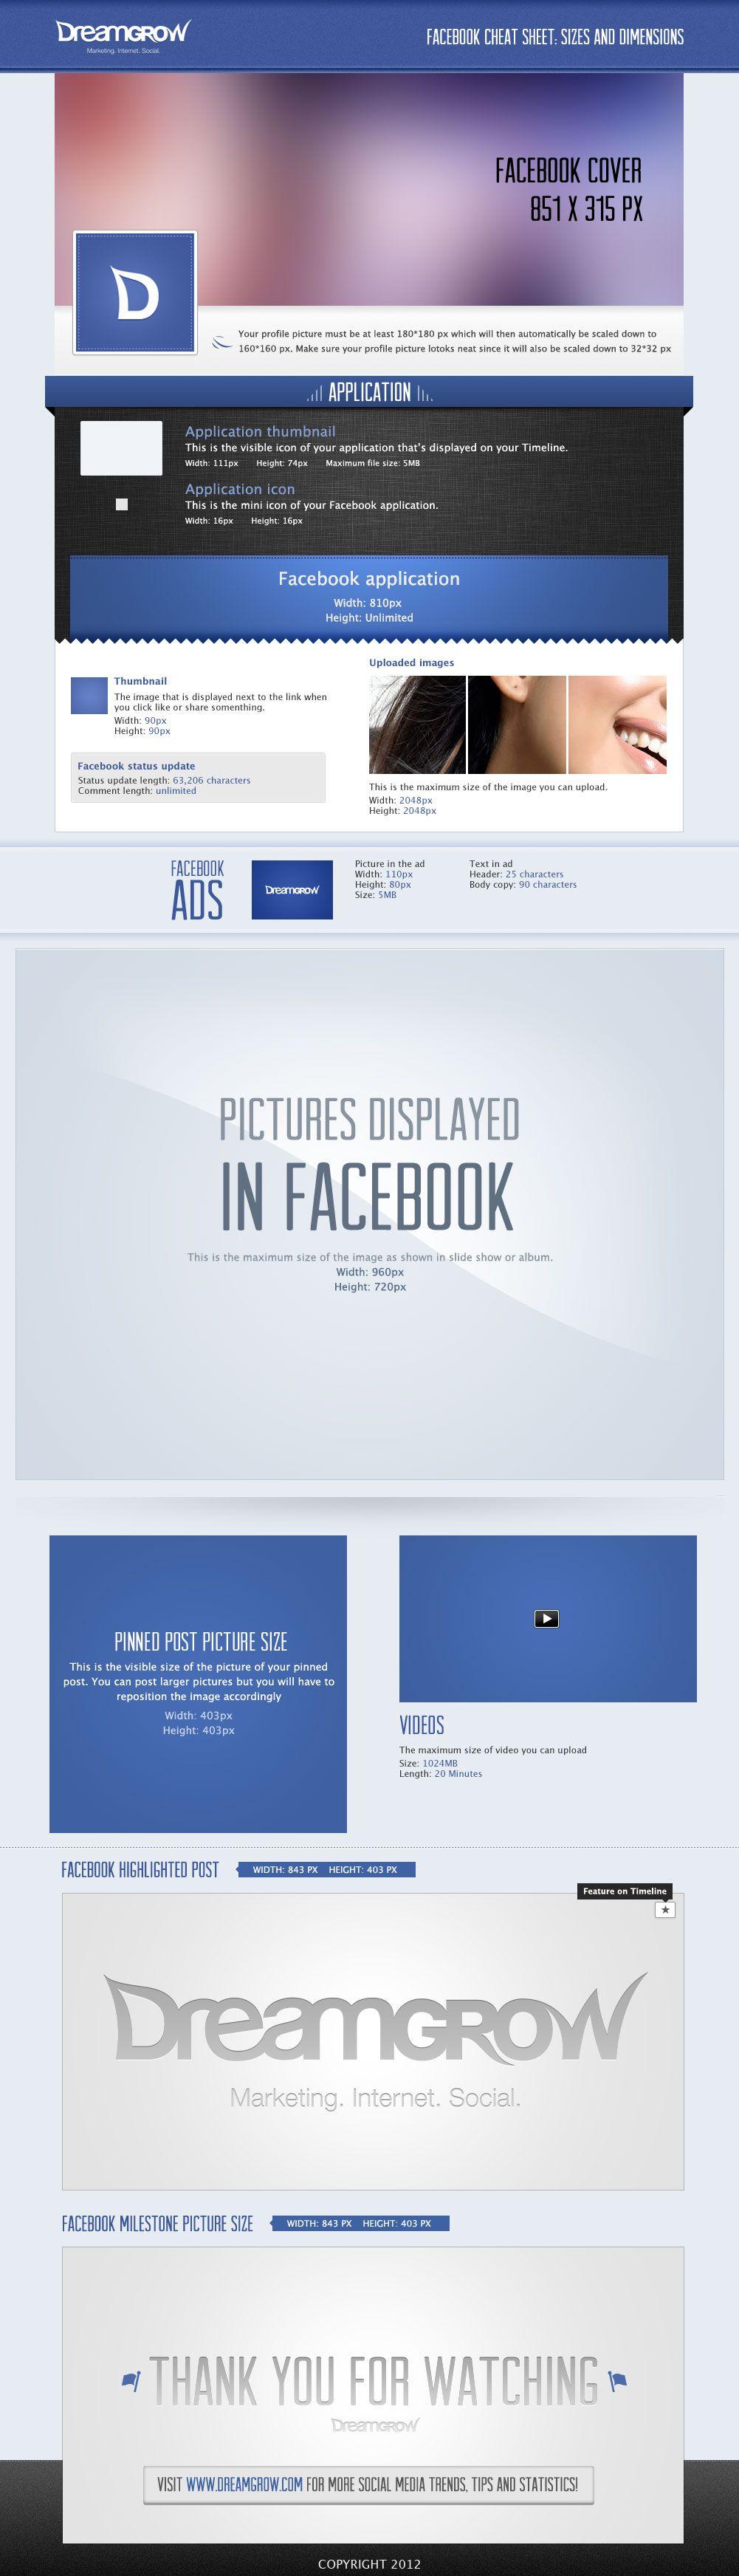 Facebook Mini Logo - Facebook Cheat Sheet: All Sizes and Dimensions 2018 2018